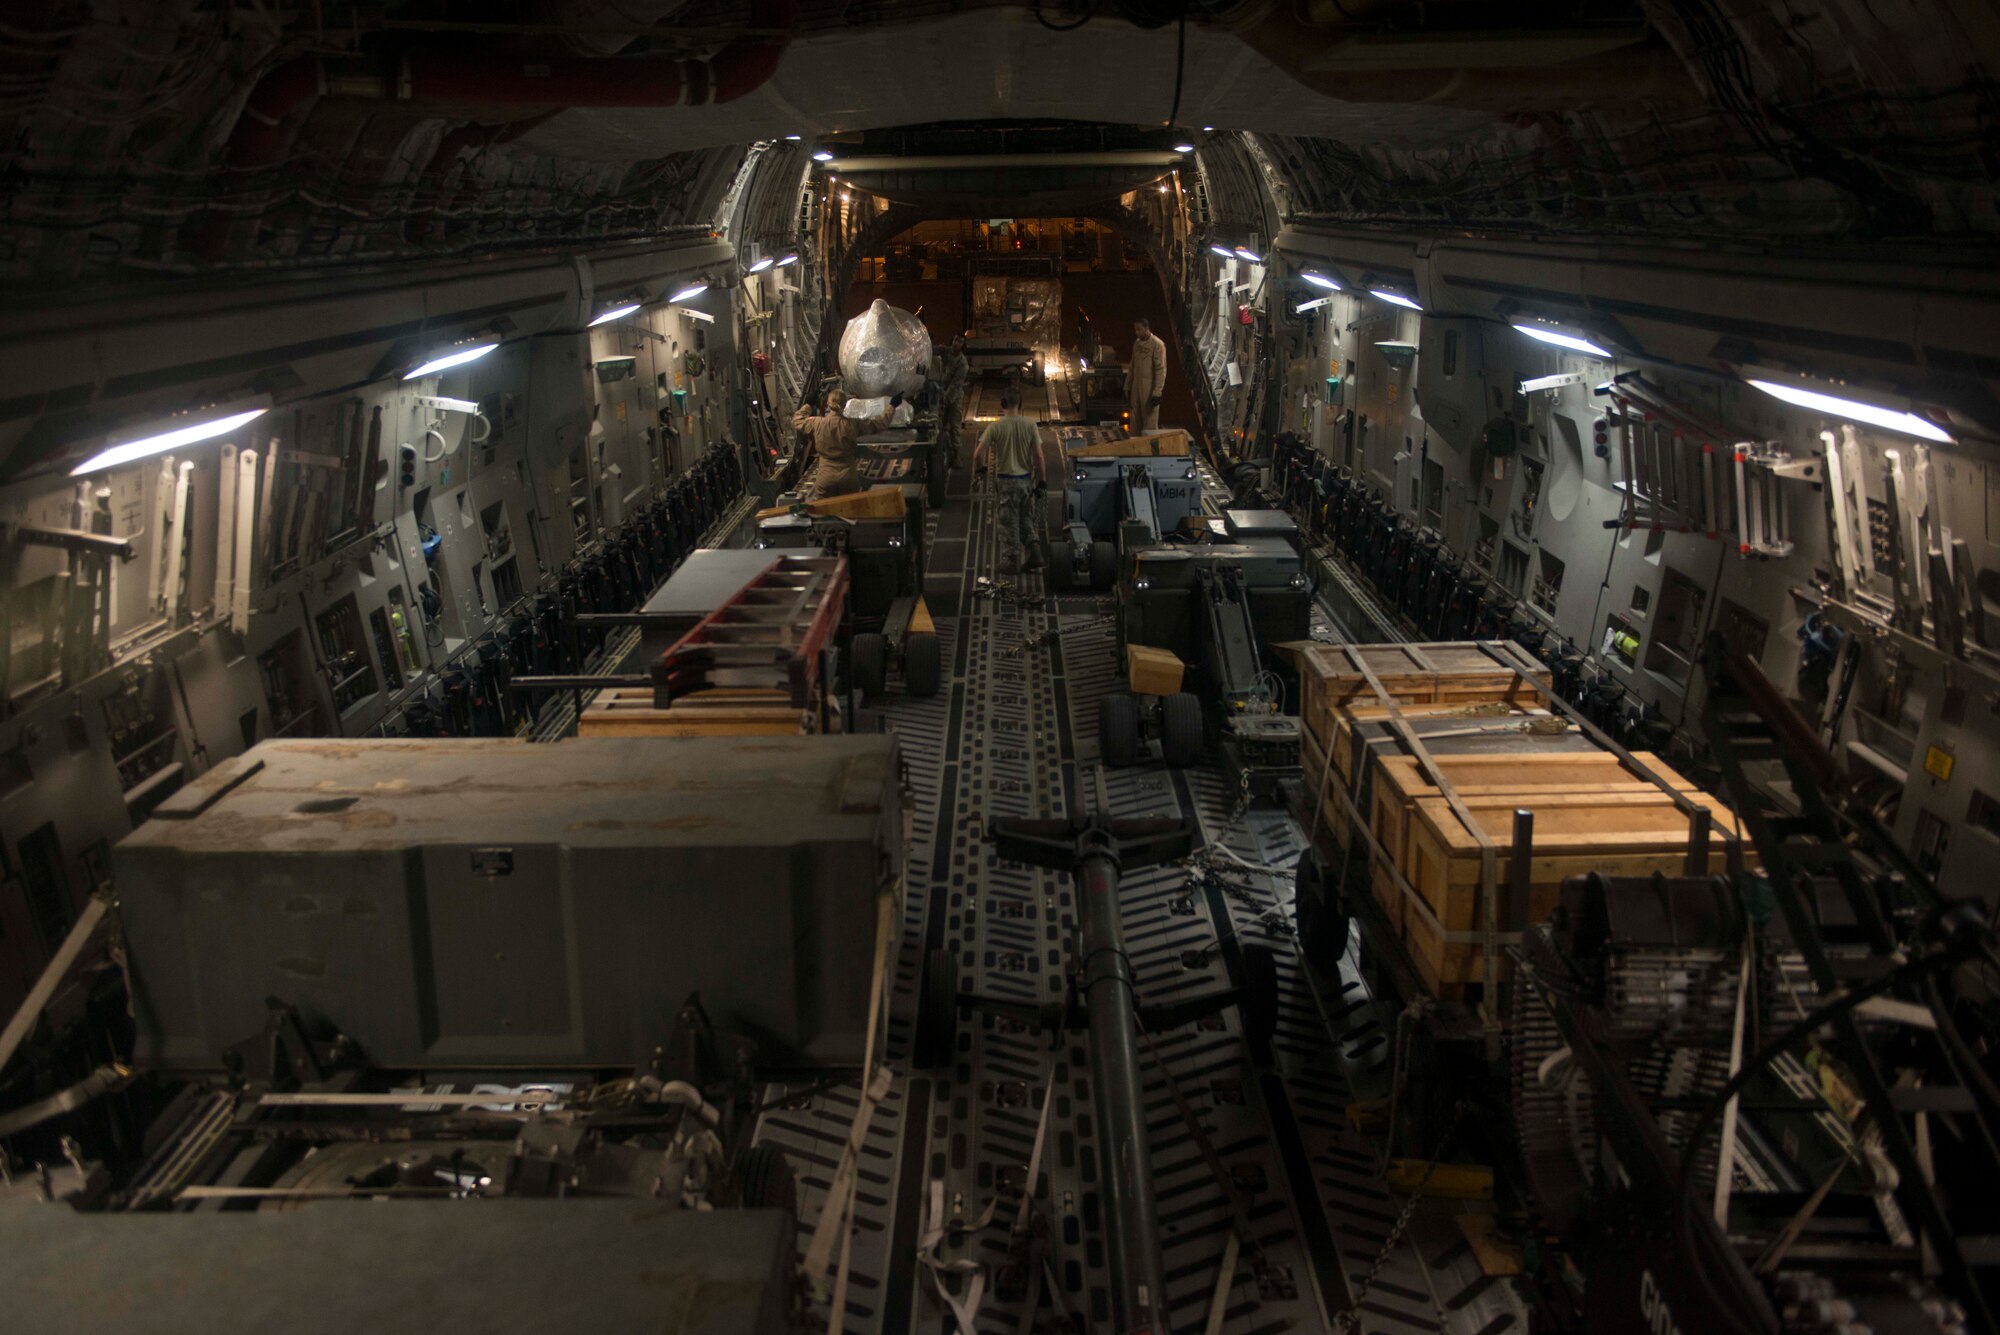 U.S. Airmen assigned to the 7th and 8th Airlift Squadrons load and secure cargo on a C-17 Globemaster III Oct. 21, 2016, at Incirlik Air Base, Turkey. Loadmasters use proper weight distribution when securing cargo to ensure the aircraft remains properly leveled during flight. (U.S. Air Force photo by Senior Airman John Nieves Camacho)